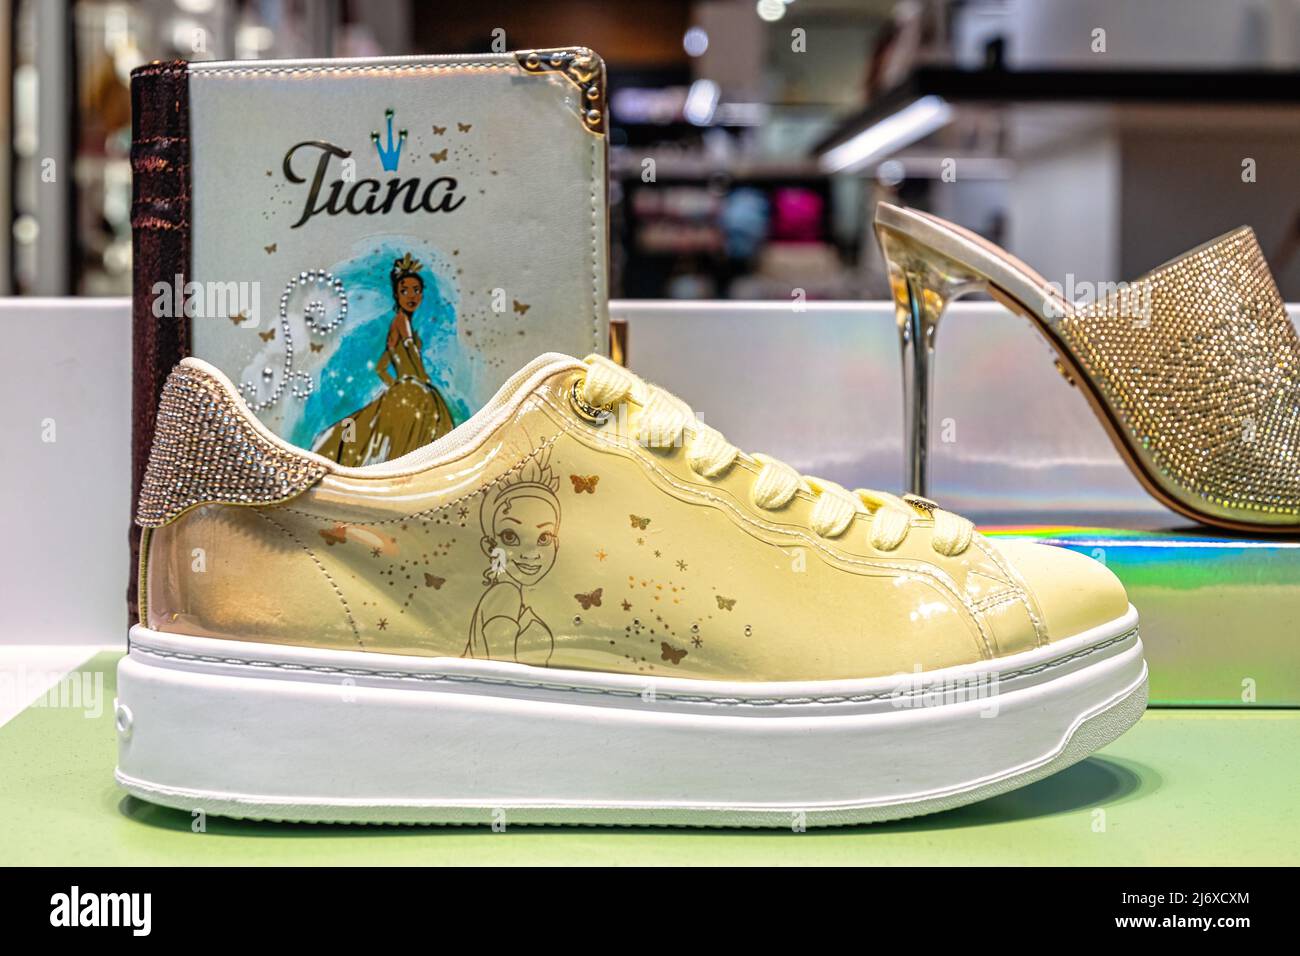 An Aldo shoe with a Walt Disney theme. Both companies have partnered to bring consumers a group of movie-themed shoes. Stock Photo